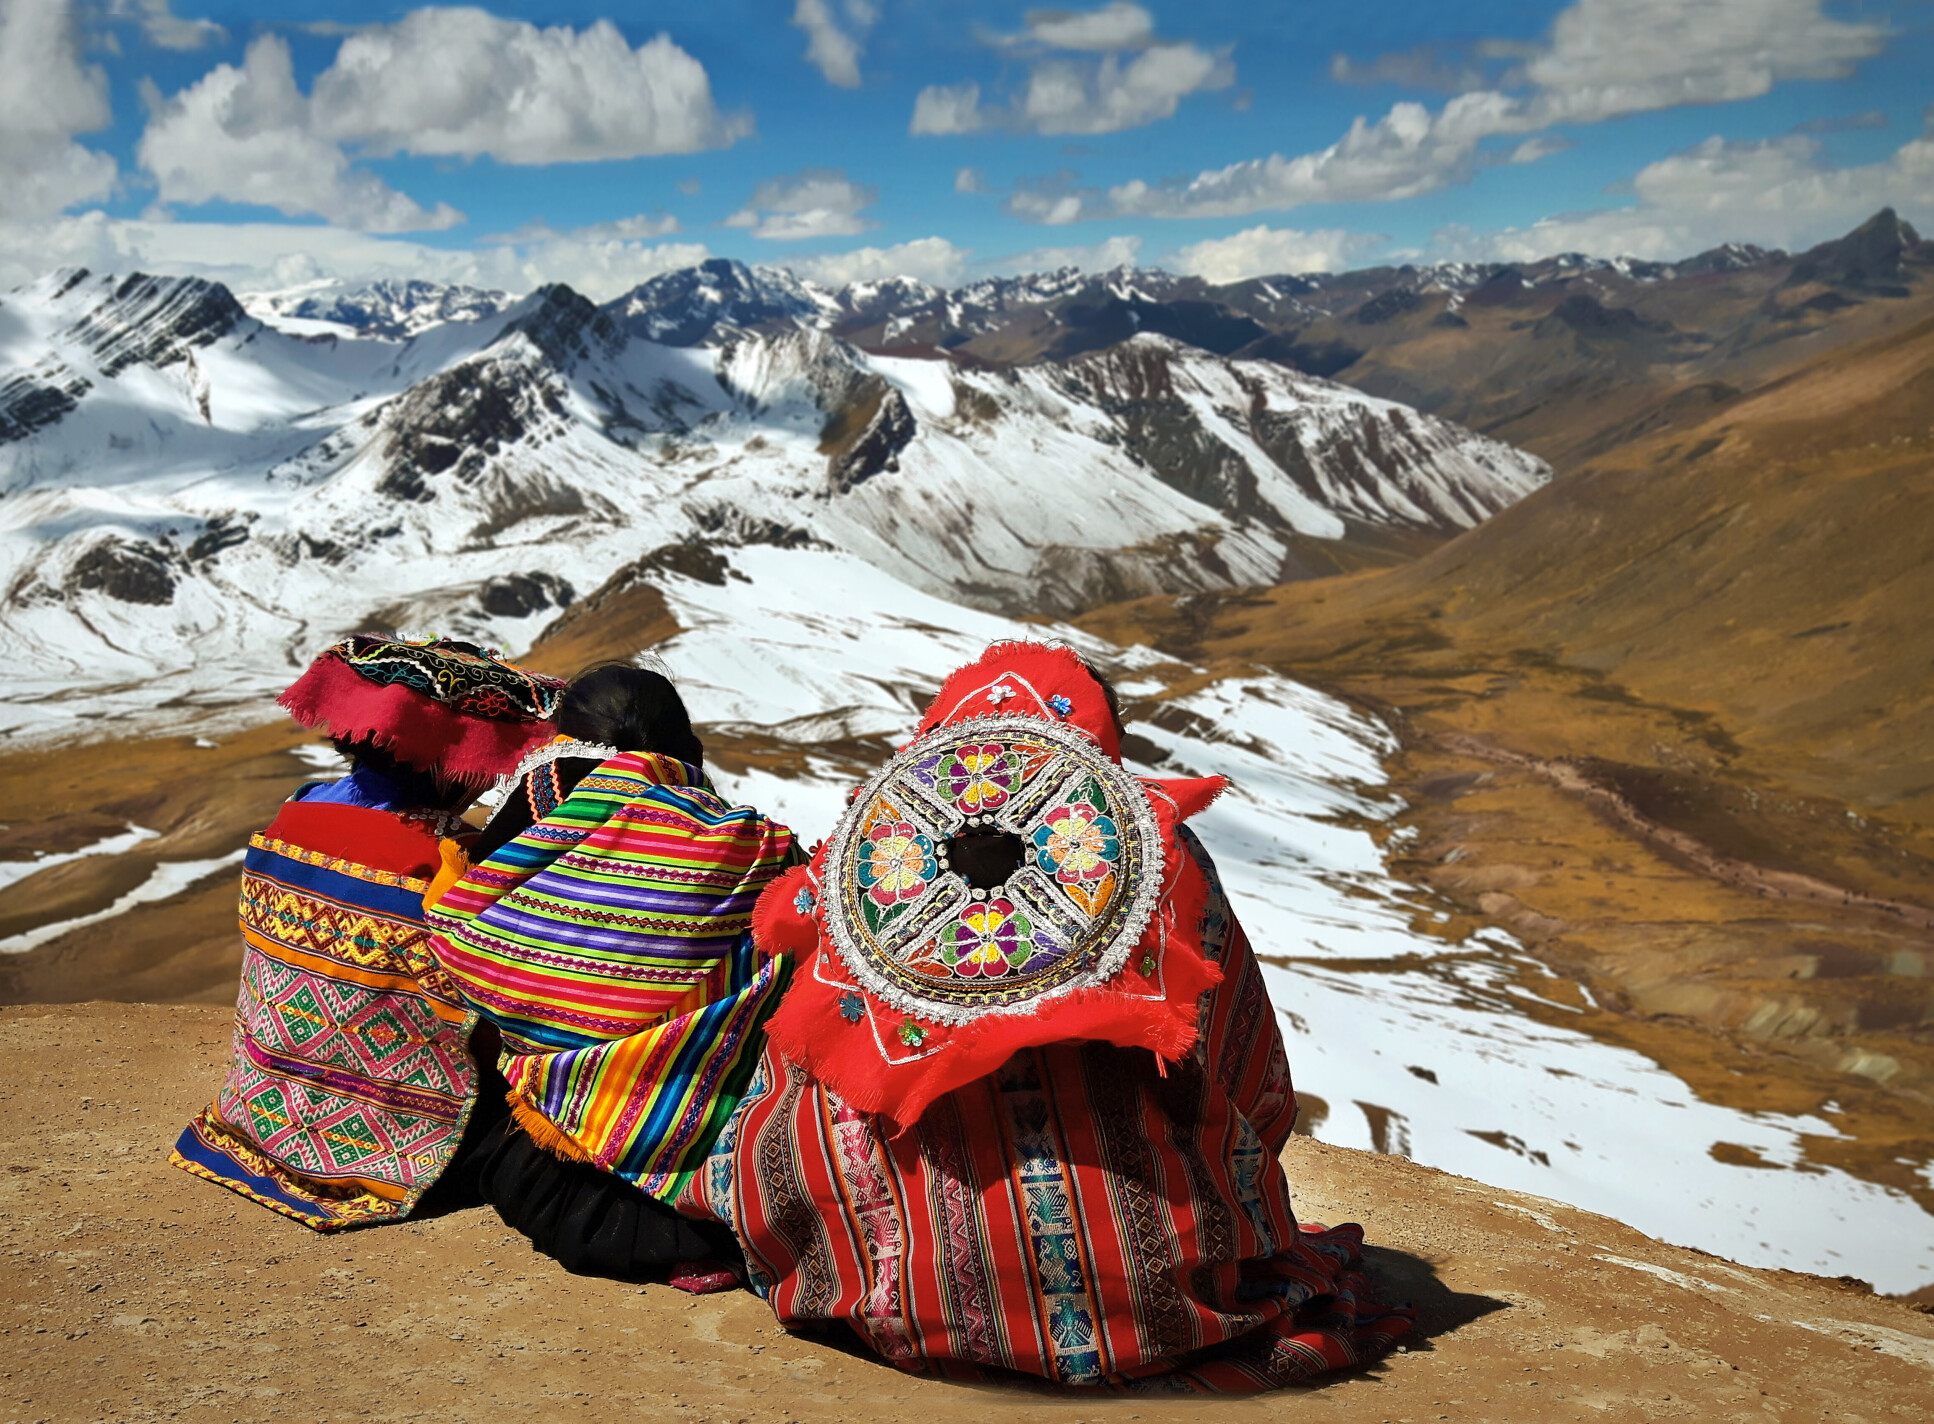 People contemplating the Andes in Peru. They sit on a peak, and look out over the snowy mountainscape.